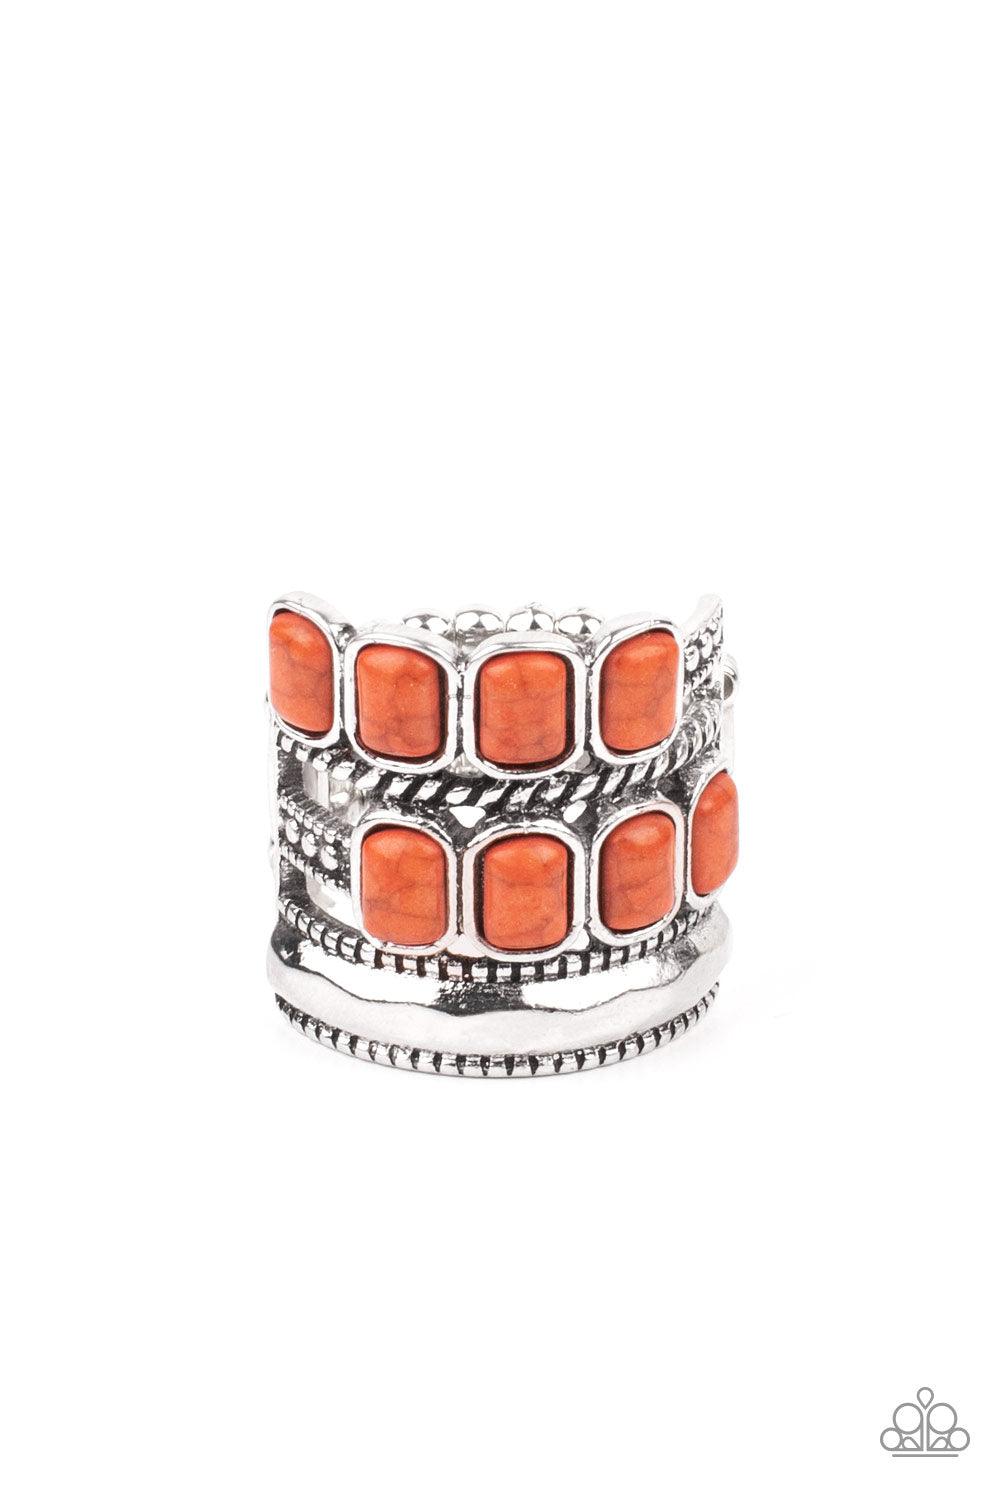 Paparazzi Accessories Mojave Monument - Orange Mismatched rows of Adobe rectangular stone beads, twisted silver and studded silver bars, and a faceted silver band haphazardly layer across the finger, coalescing into a colorfully rustic centerpiece. Featur